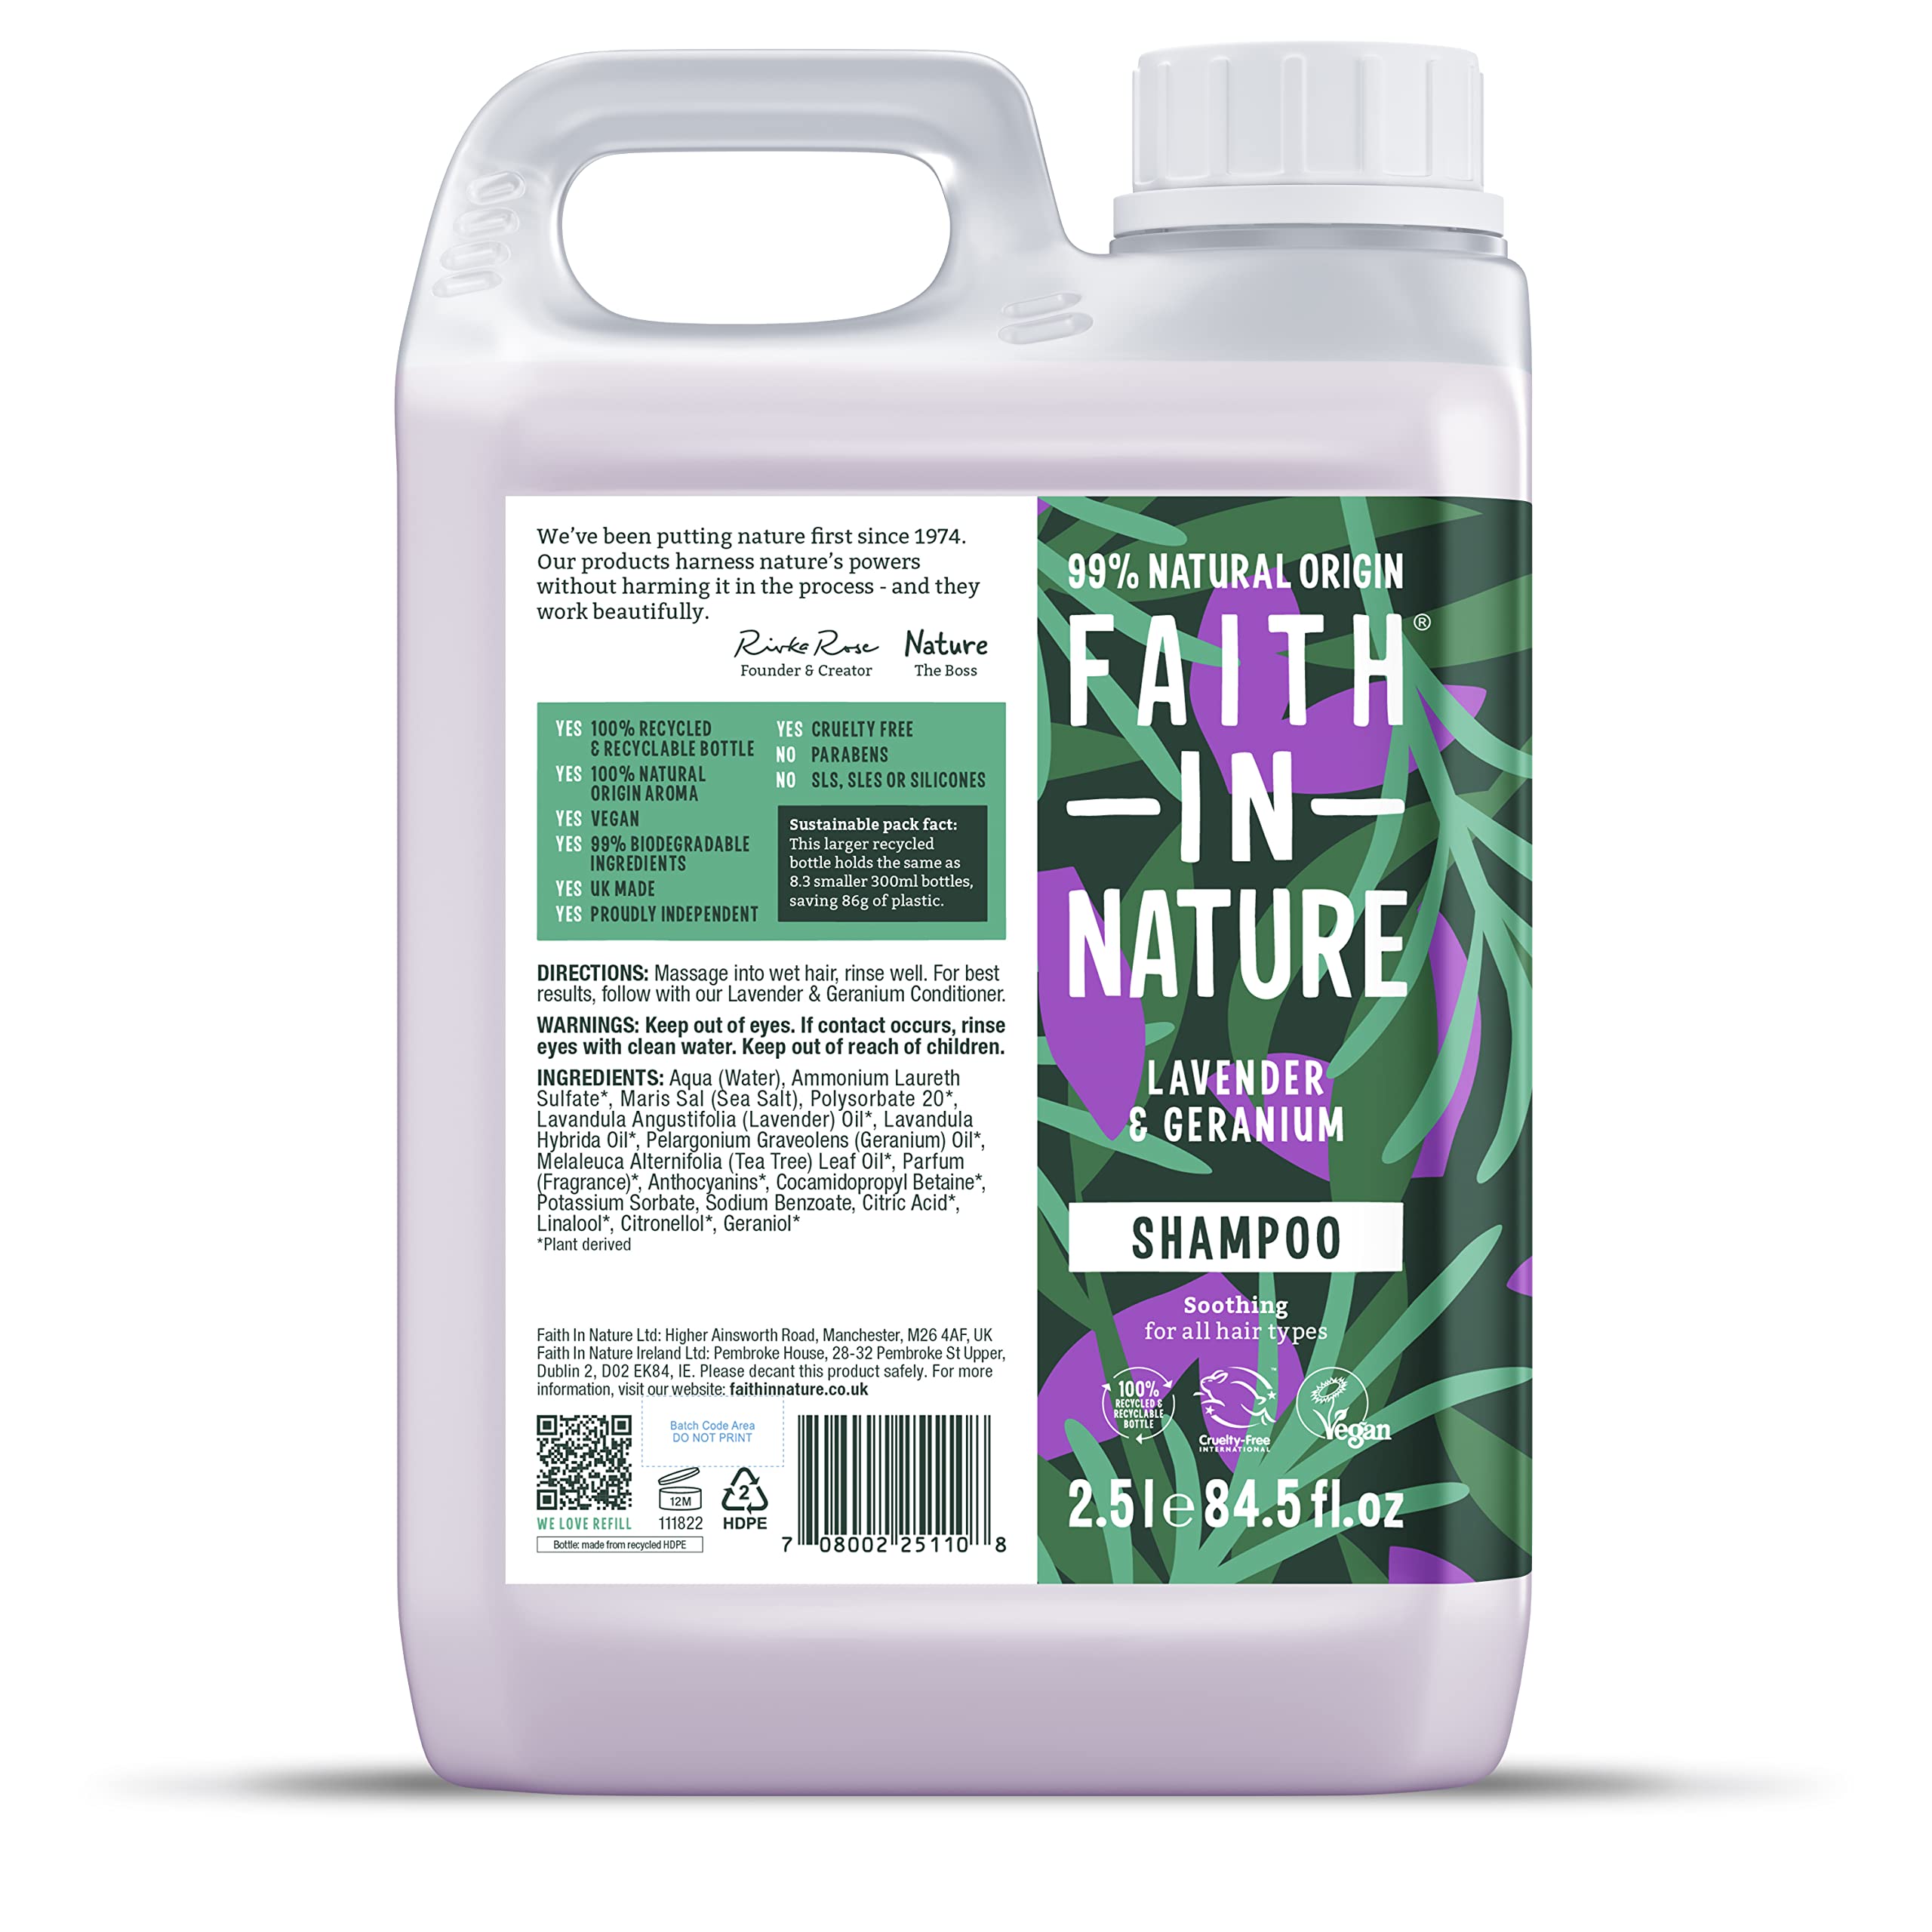 Faith In Nature Natural Lavender & Geranium Shampoo, Soothing, Vegan & Cruelty Free, No SLS or Parabens, For Normal to Dry Hair, 2.5L